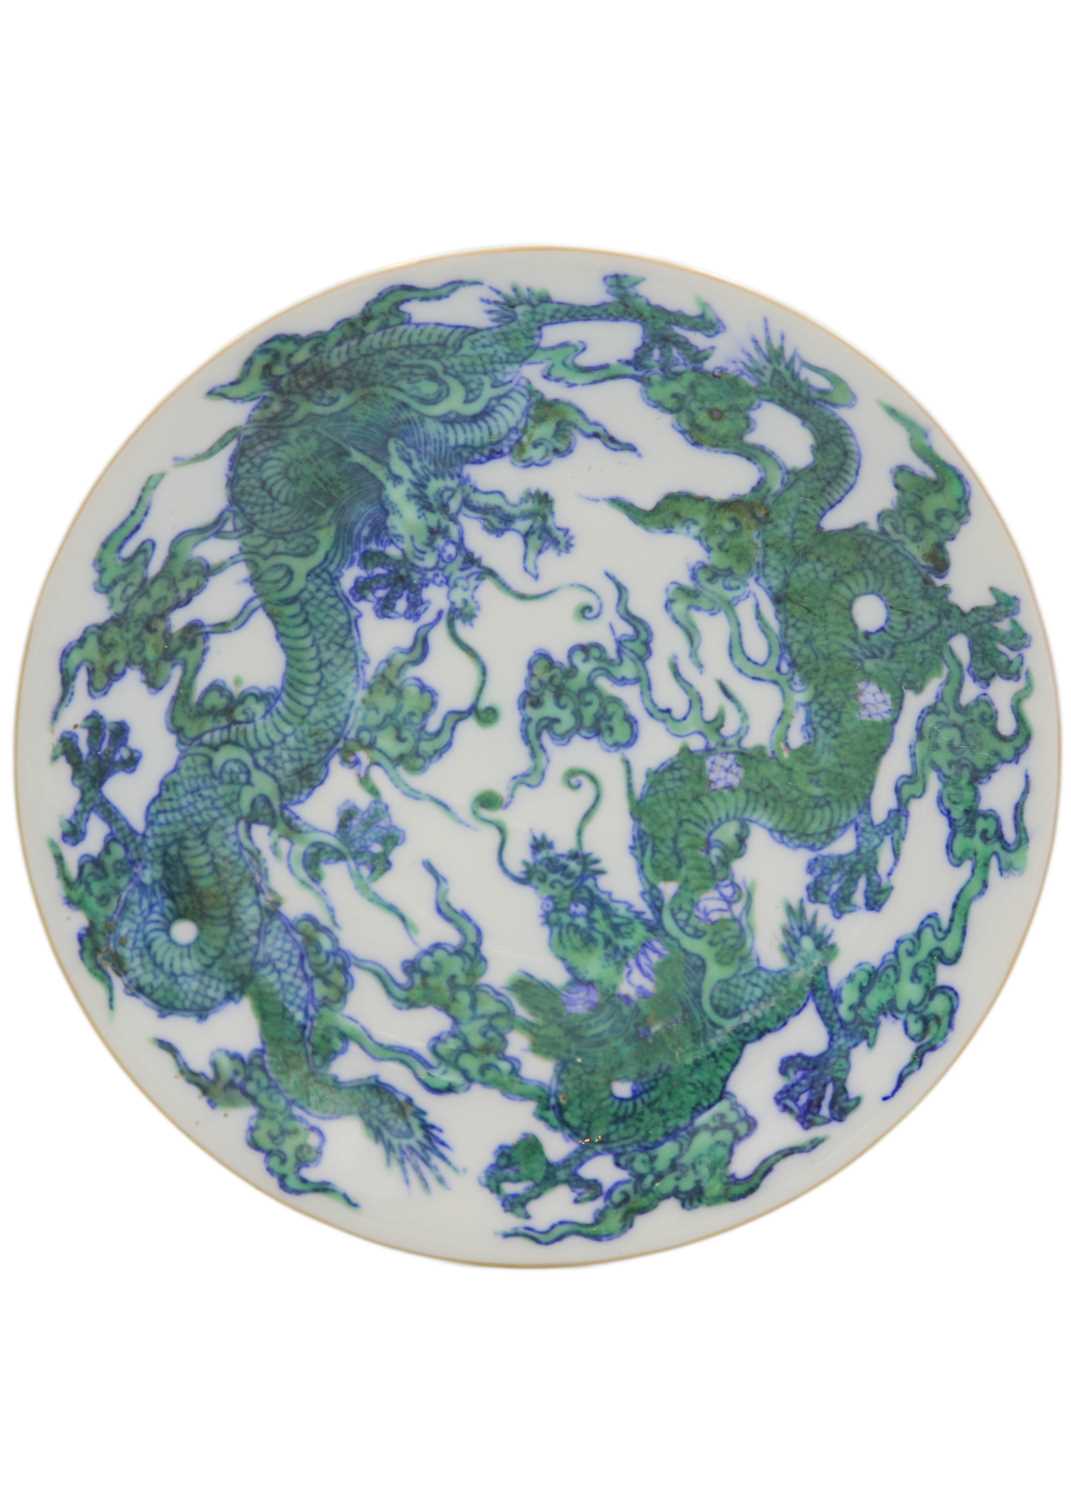 A Chinese porcelain dragon decorated plate, 20th century. - Image 4 of 5